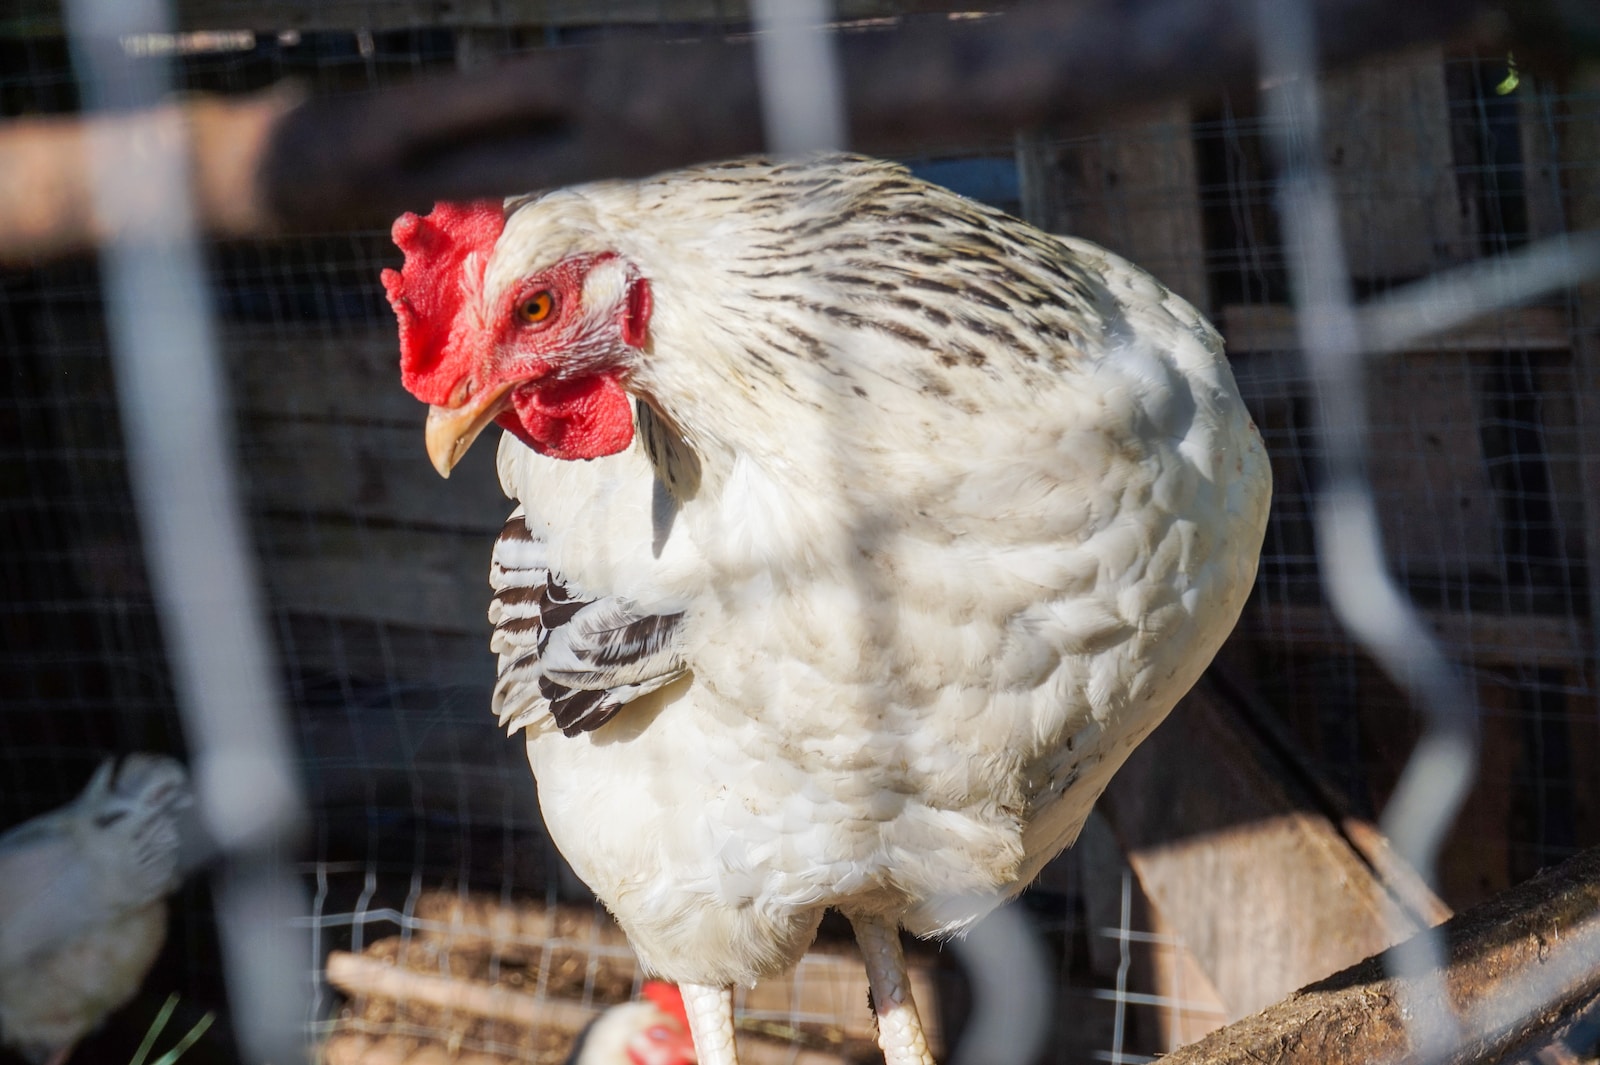 Why Chickens Make Loud Noises While Laying Eggs - Causes and Solutions